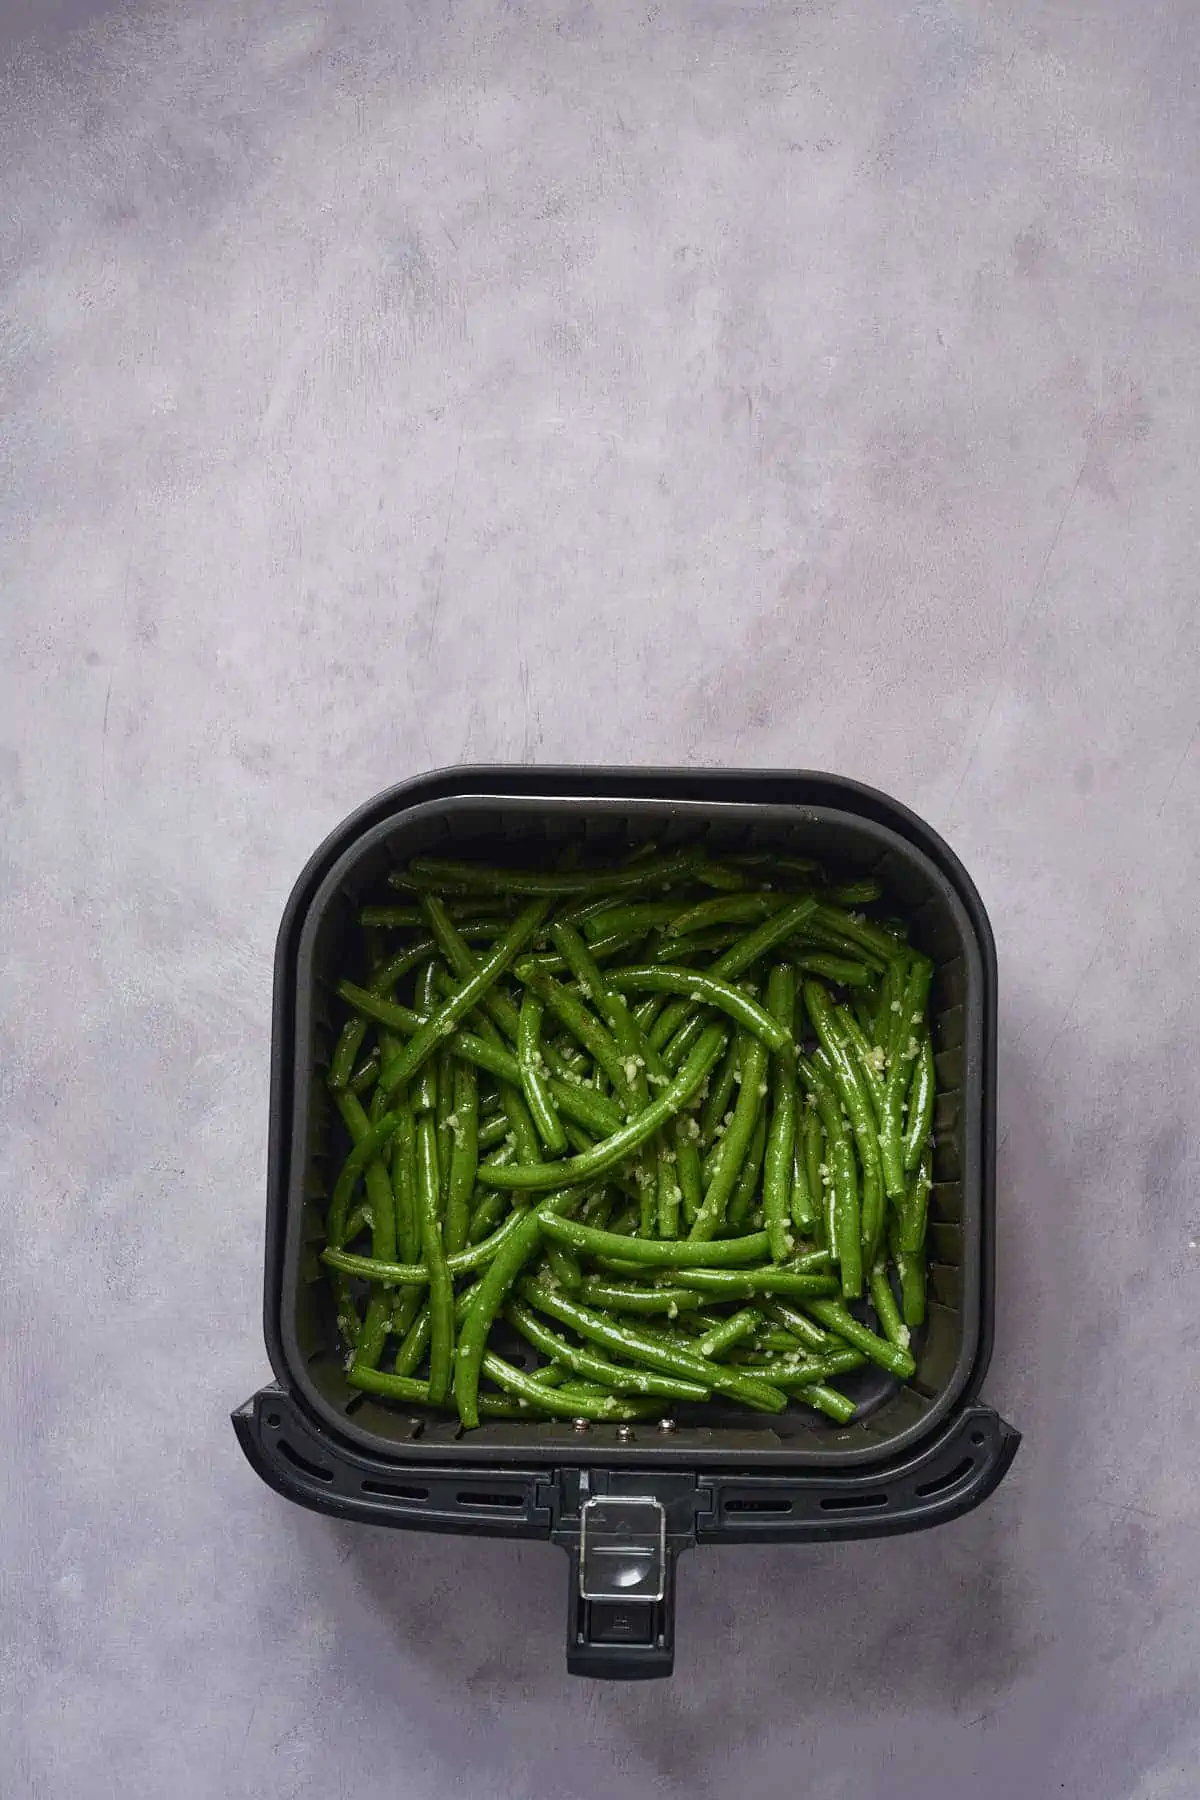 Uncooked garlic green beans in the air fryer basket.